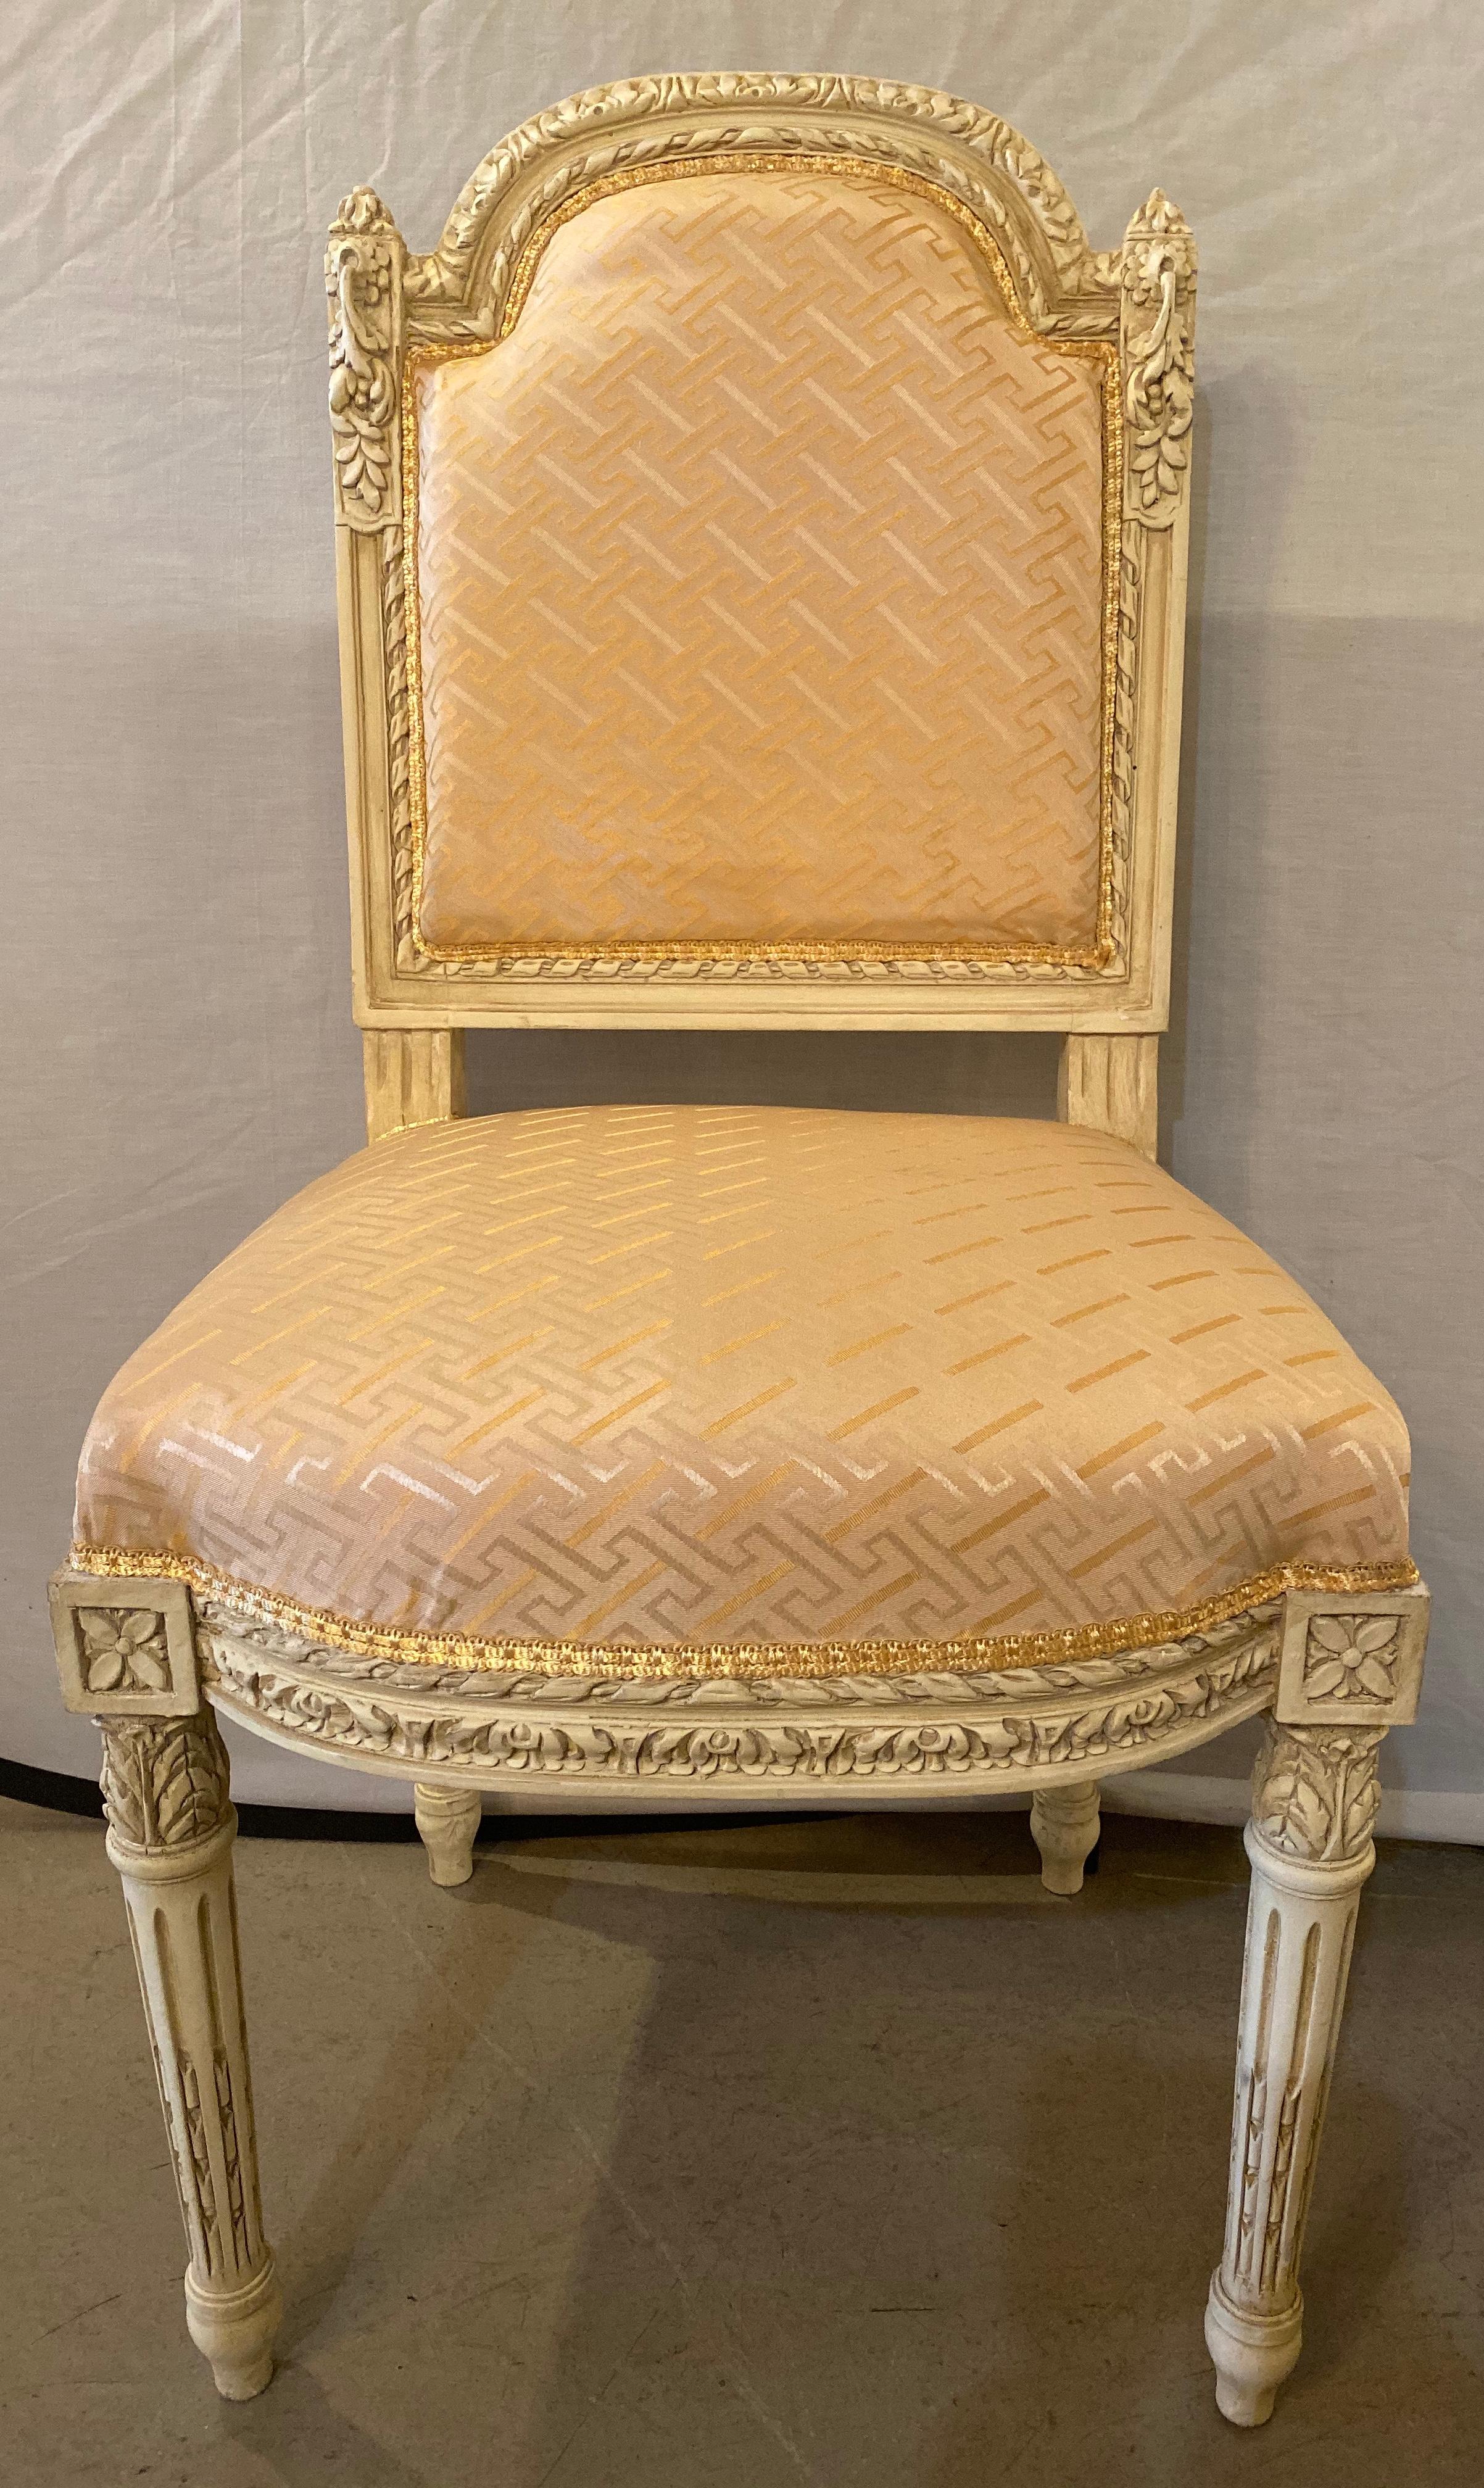 10 Swedish Louis XVI style dining / side chairs painted carved frames in a salmon satin new fabric
This stunning set of 10 dining chairs have been fully refinished and each are done in a fine new fabric. Each having a tapering carved group of legs